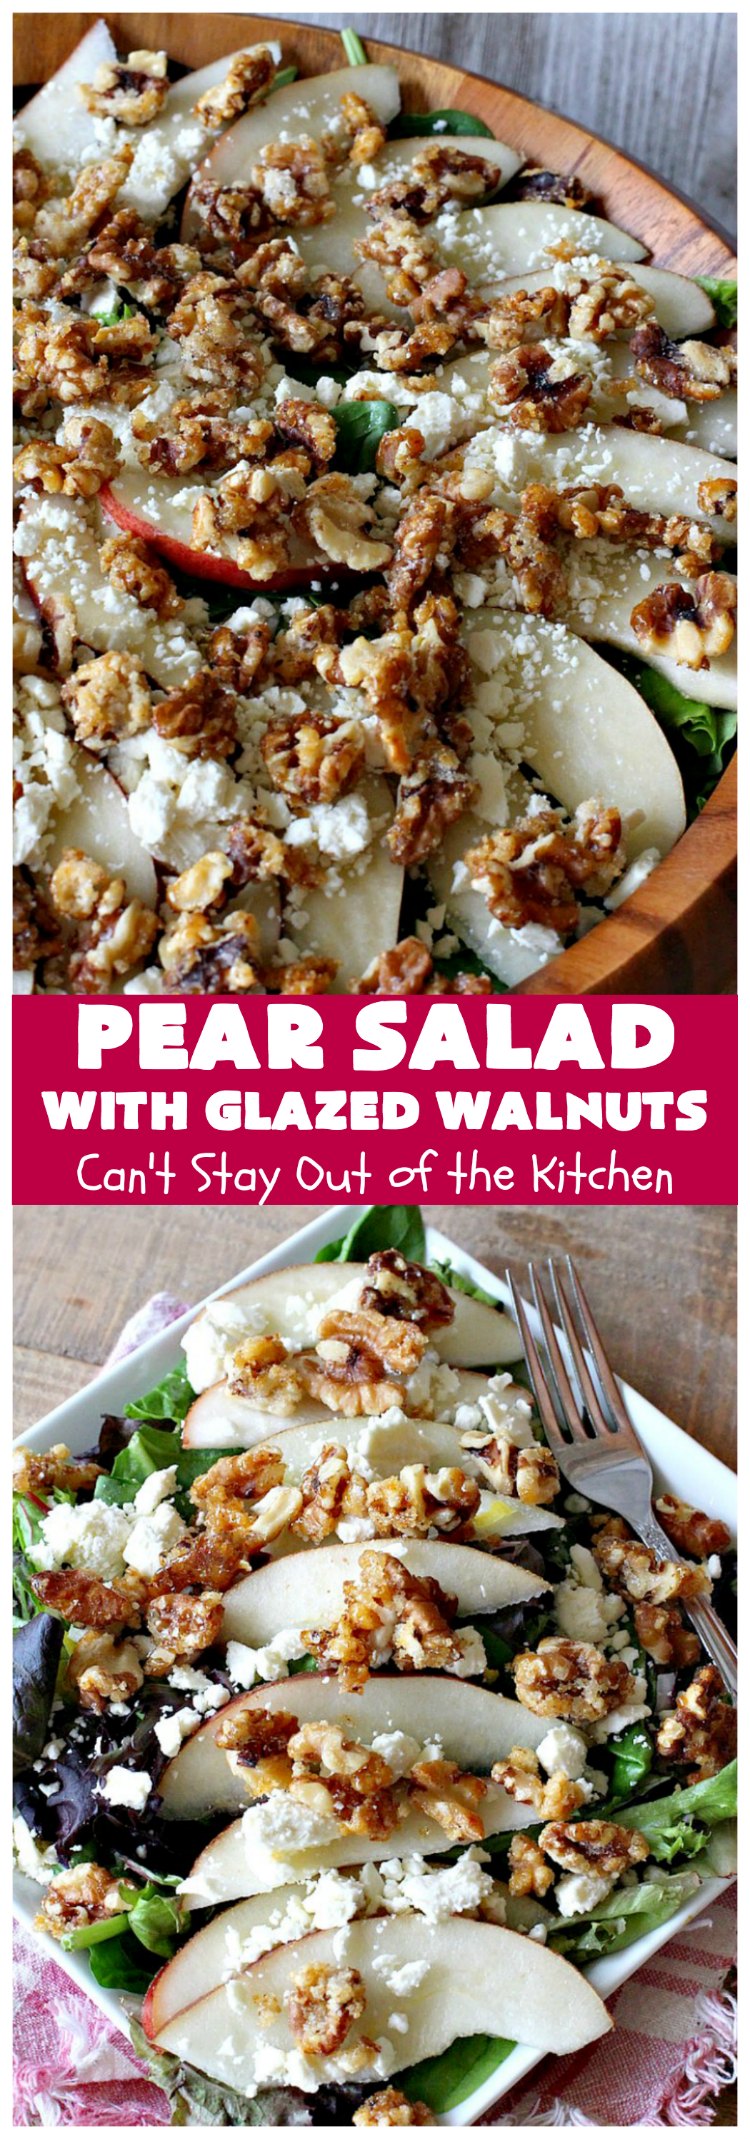 Peach Salad with Glazed Walnuts | Can't Stay Out of the Kitchen